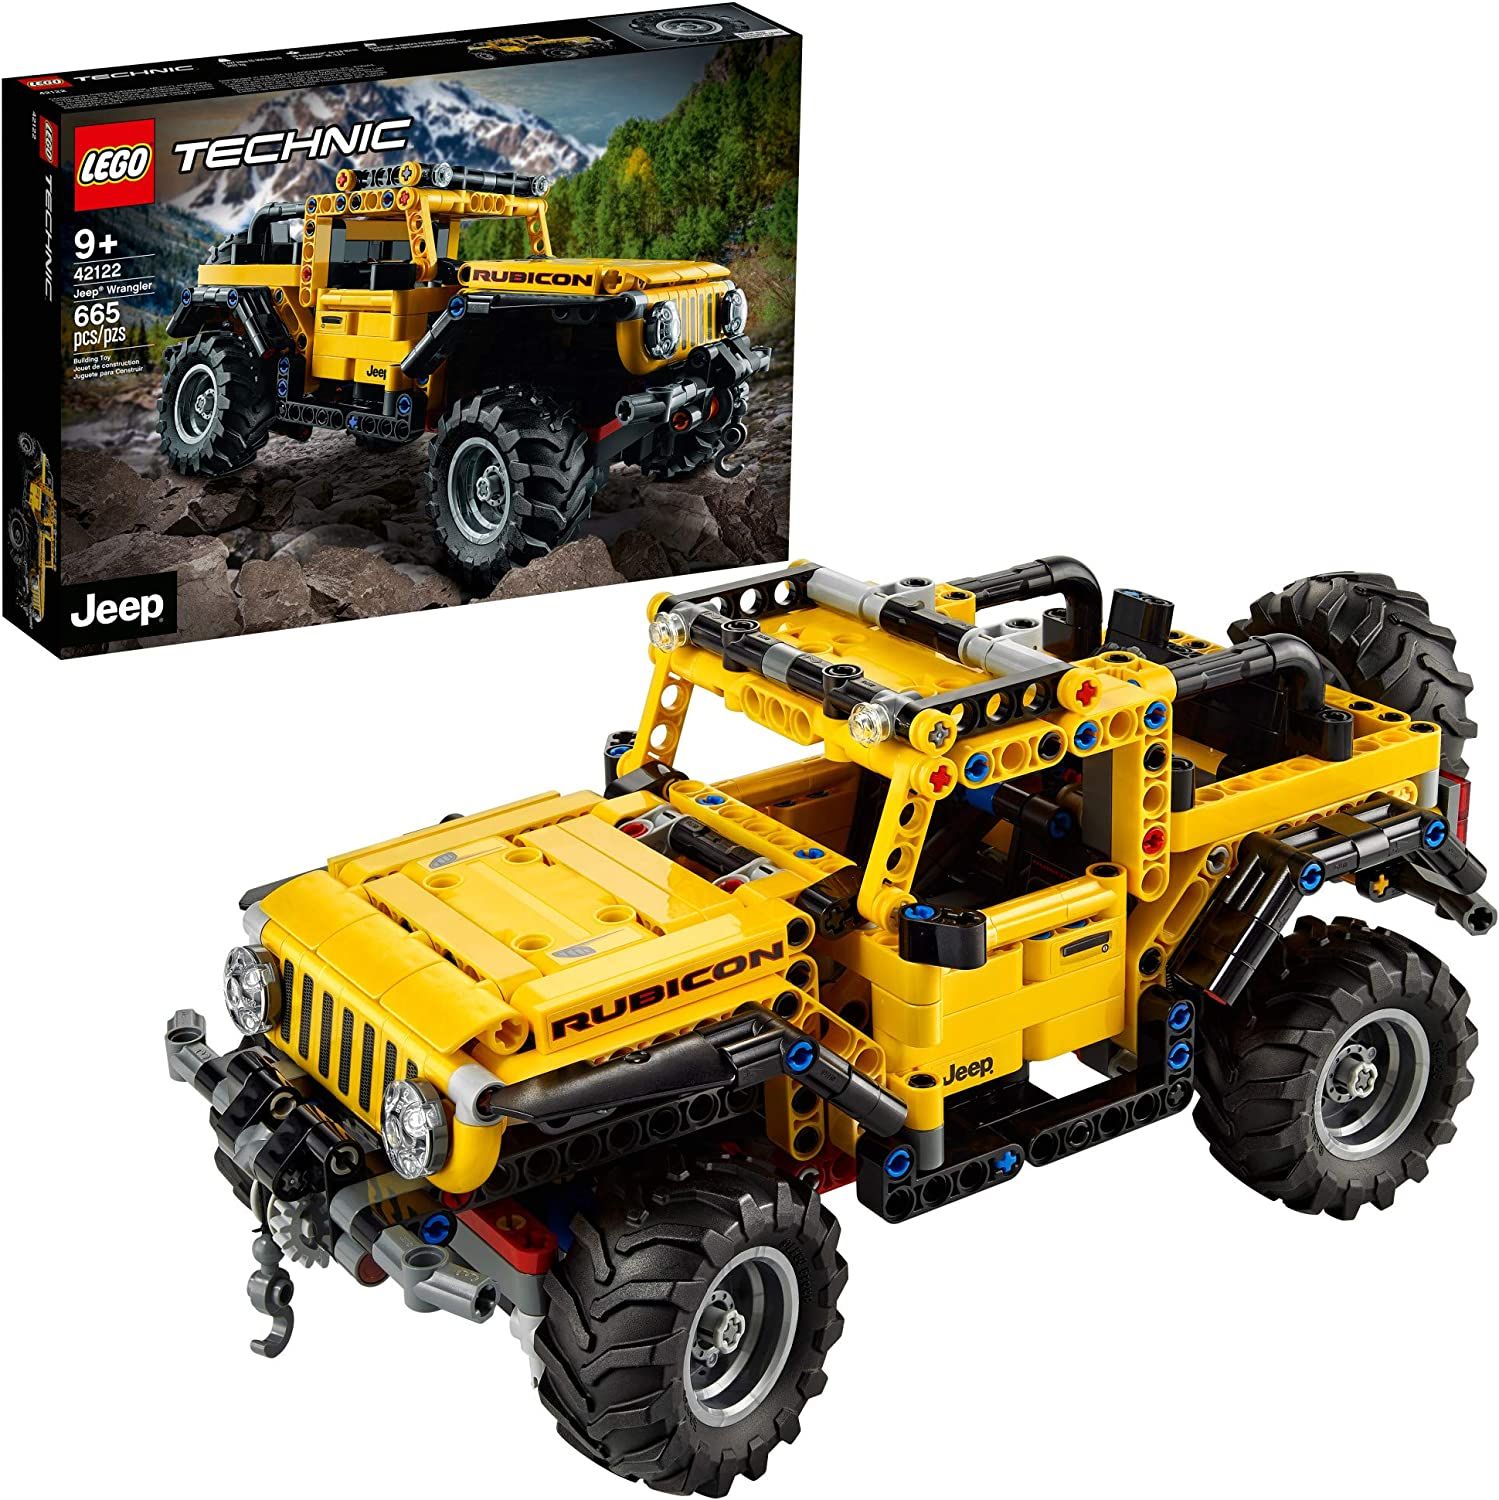 The 10 Best LEGO Technic Sets (Updated 2022)